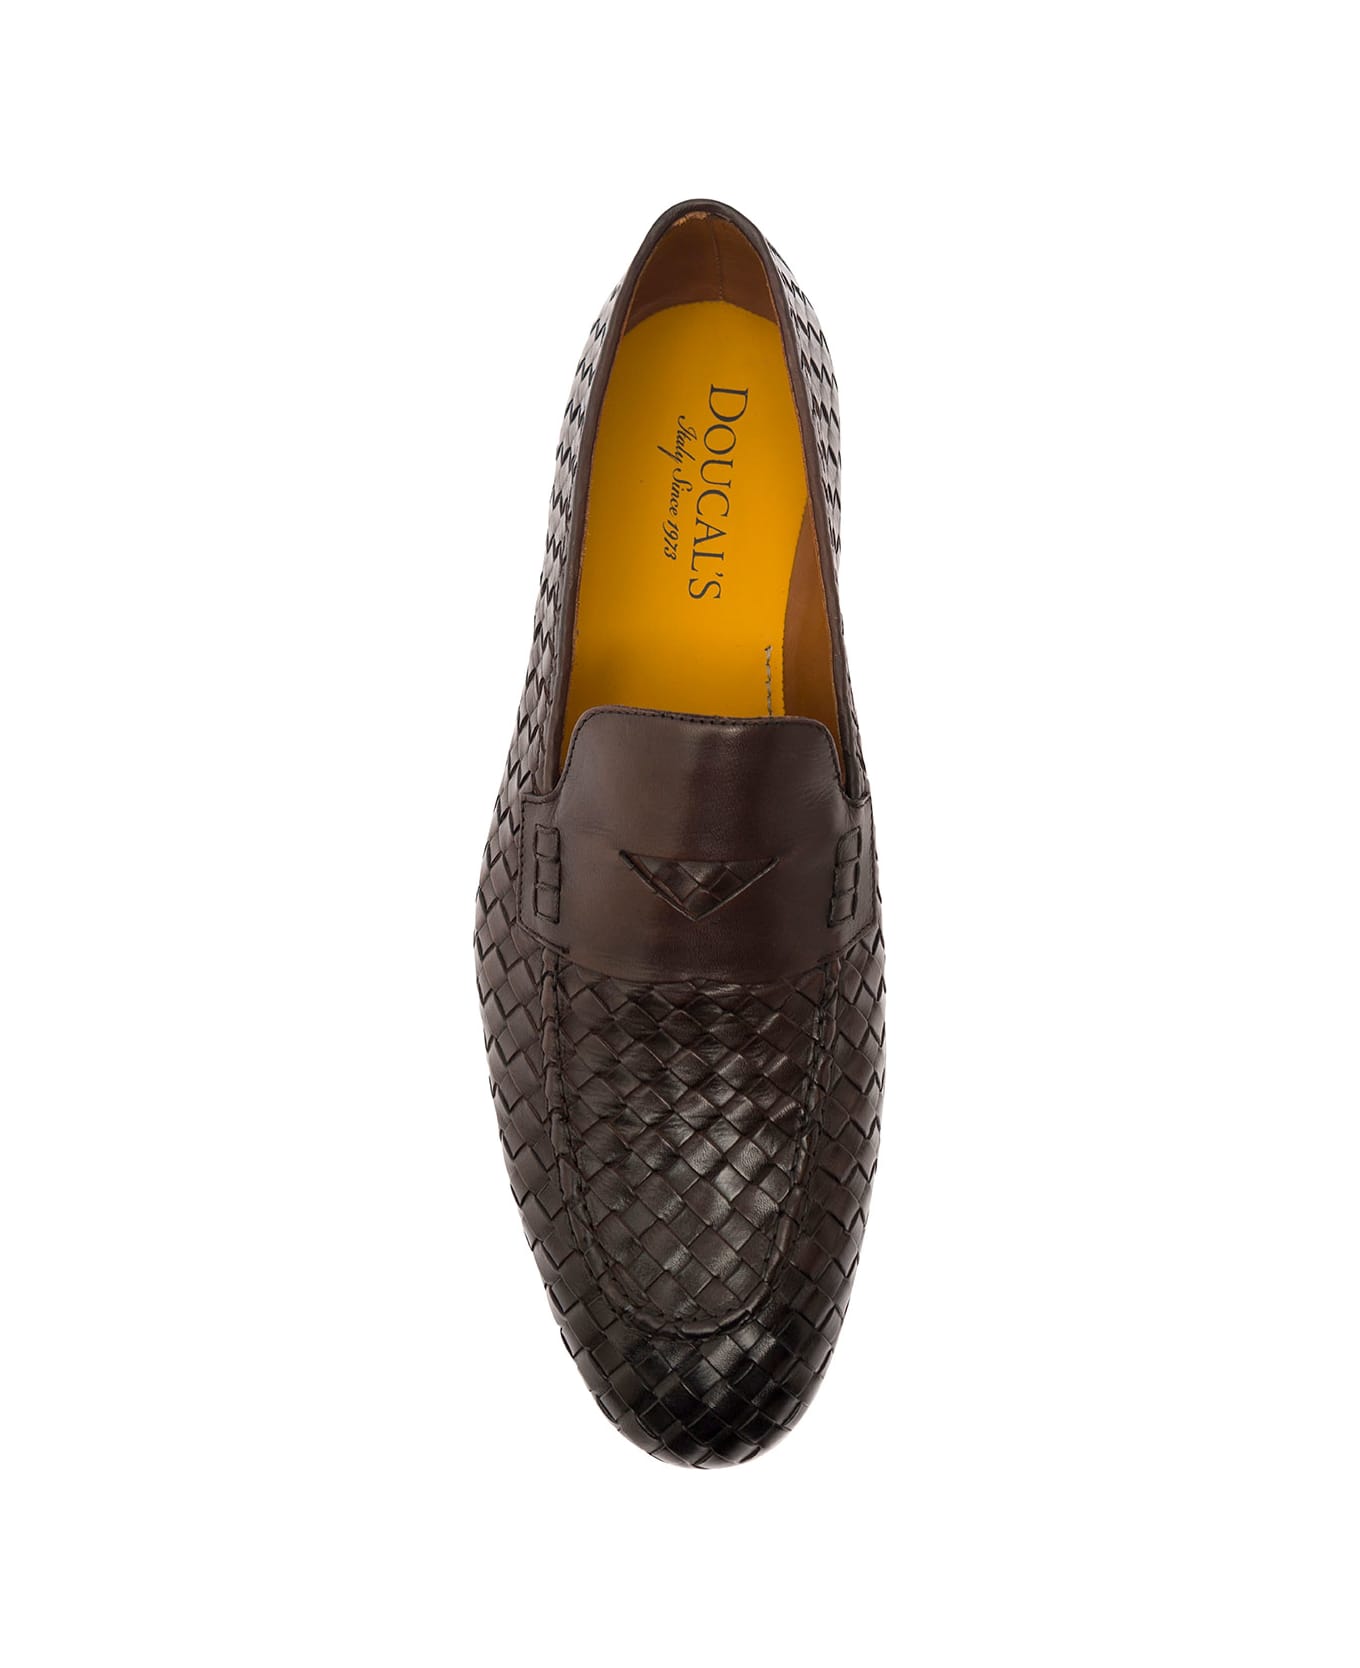 Doucal's Brown Pull On Loafers In Woven Leather Man - Brown ローファー＆デッキシューズ